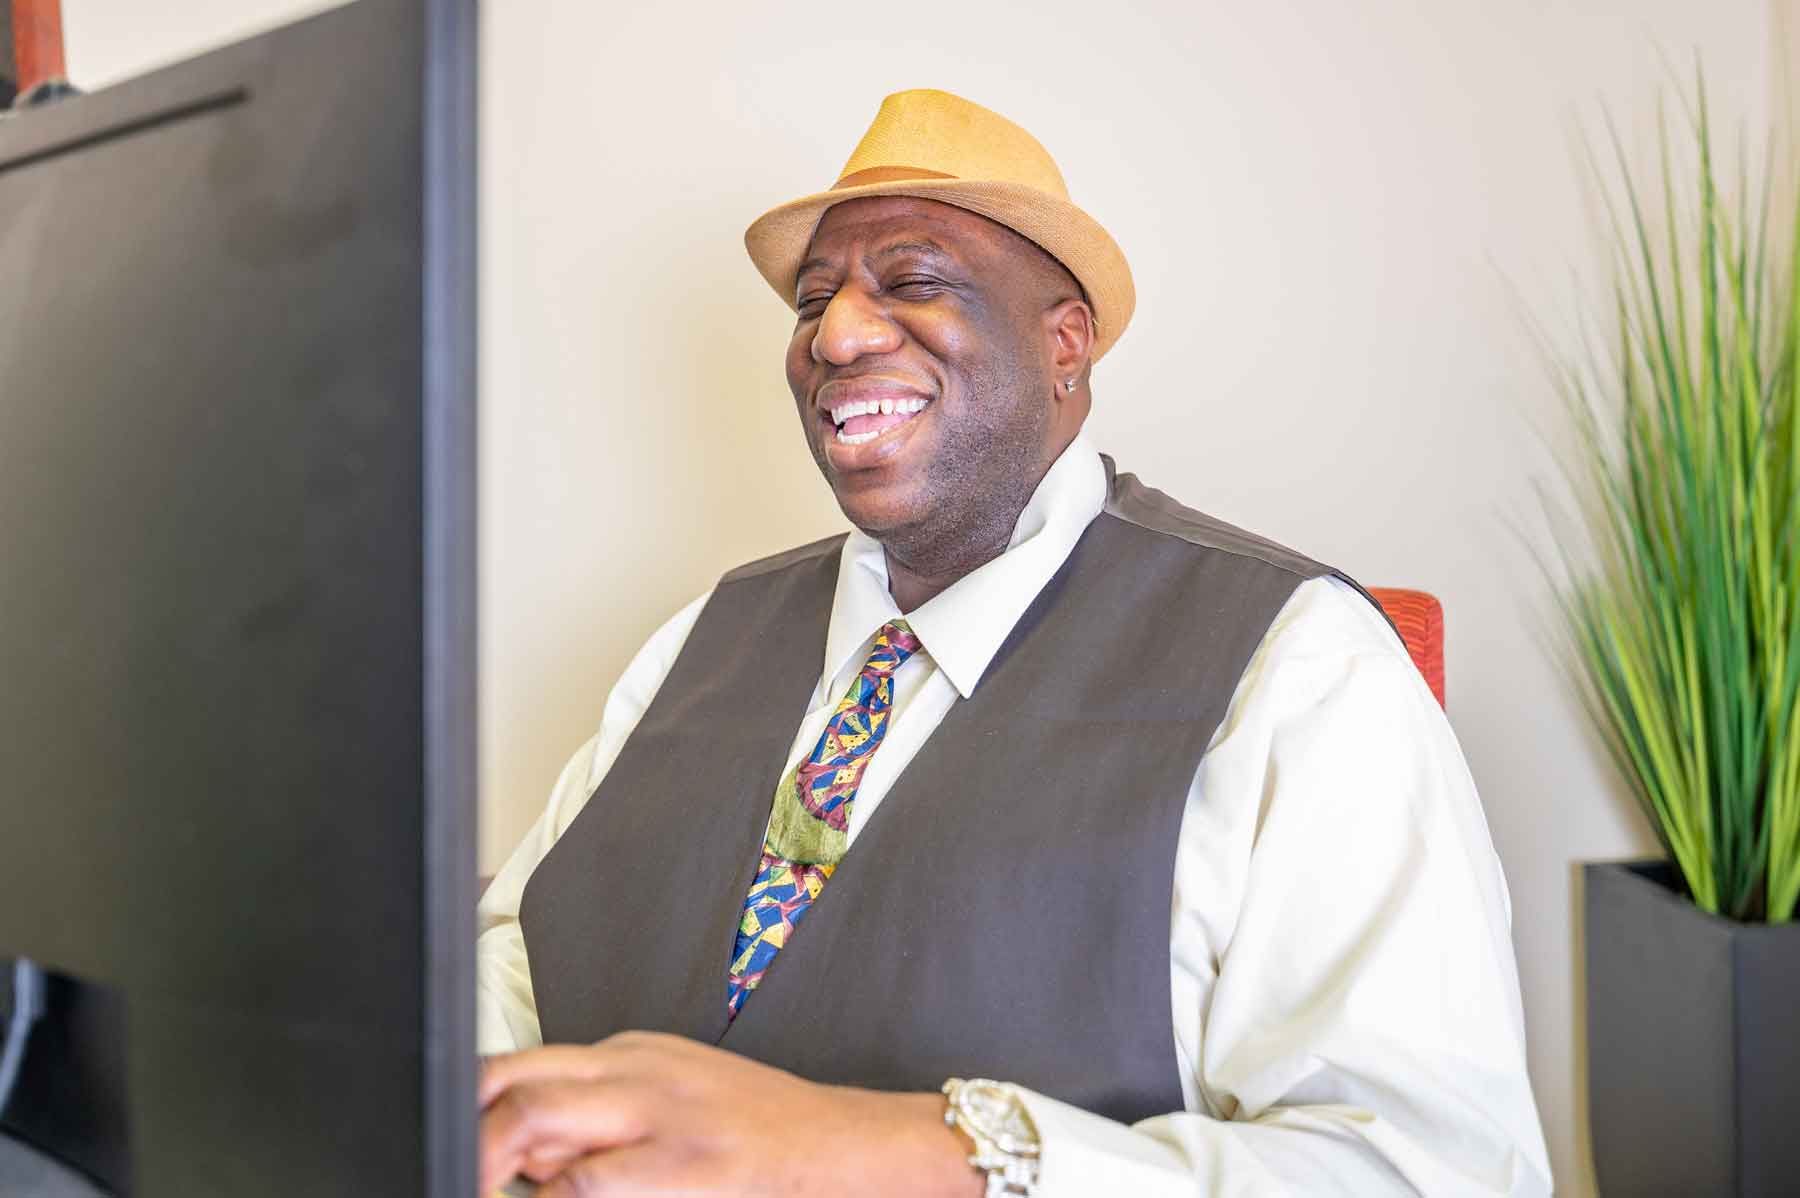 A dark skinned man wearing a hat, vest, and tie and sitting in front of a computer, smiling.